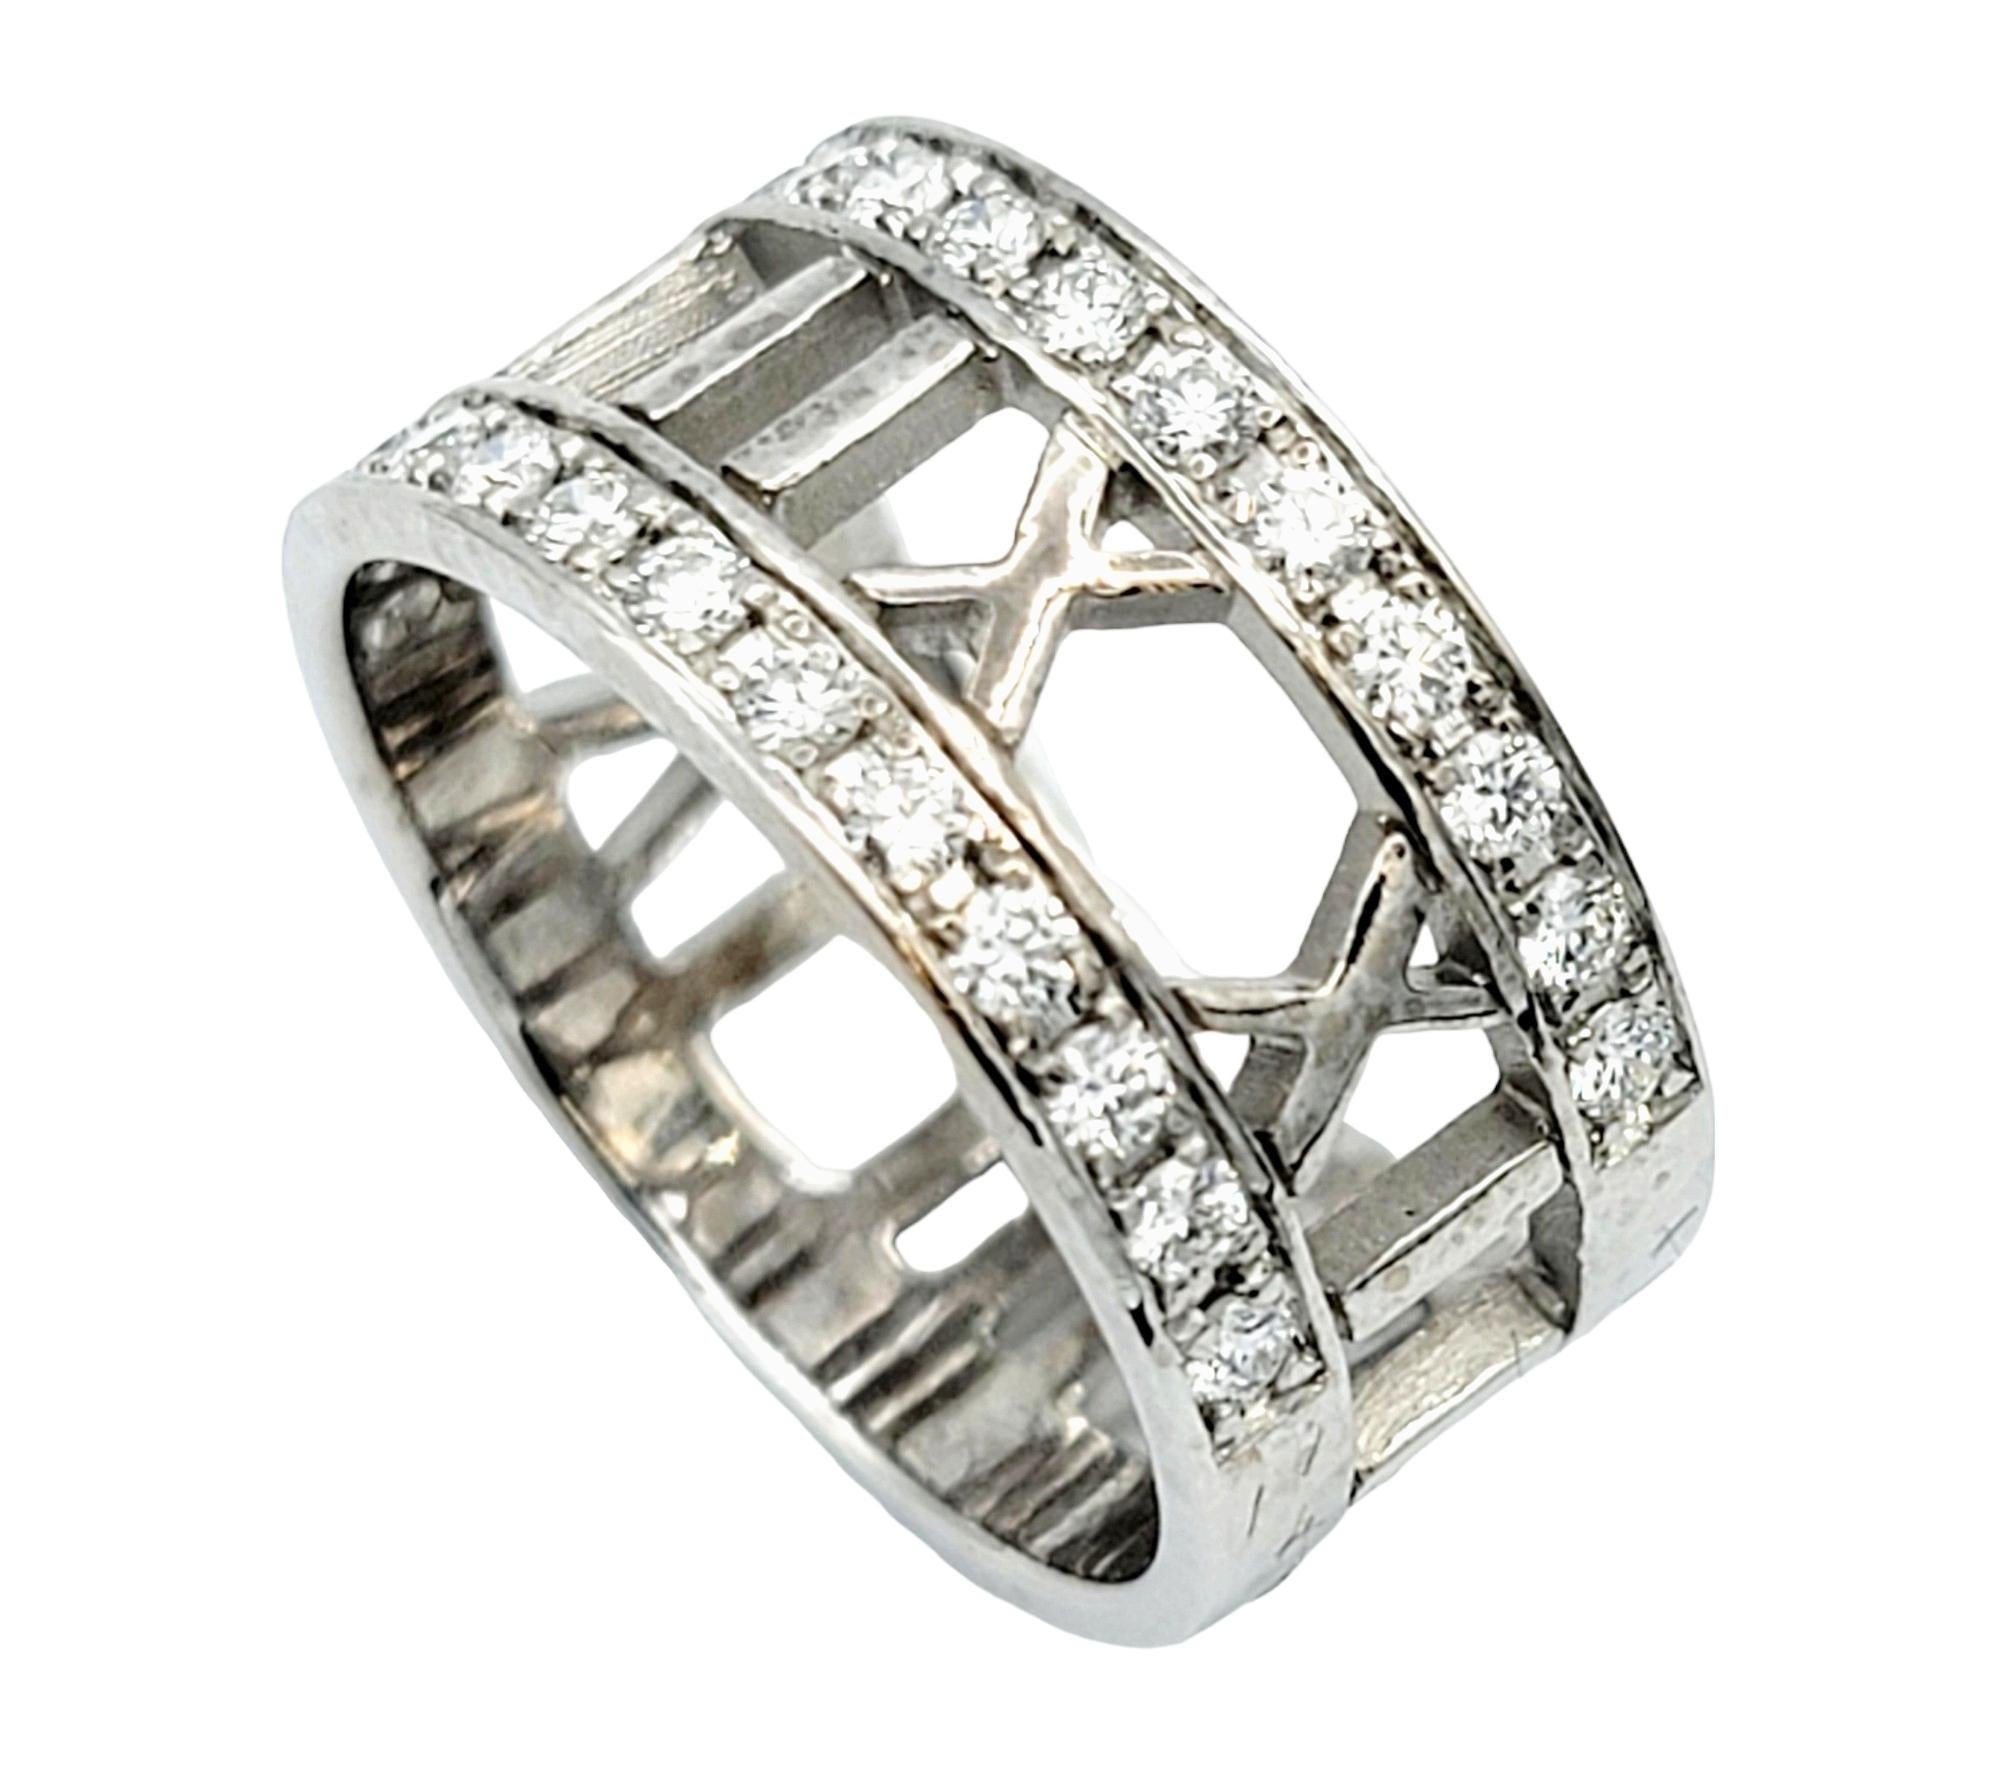 Ring size: 5.5

Sophisticated and stunning Tiffany & Co. Atlas Collection band ring with diamonds. Founded in 1837 in New York City, Tiffany & Co. is one of the world's most storied luxury design houses recognized globally for its innovative jewelry